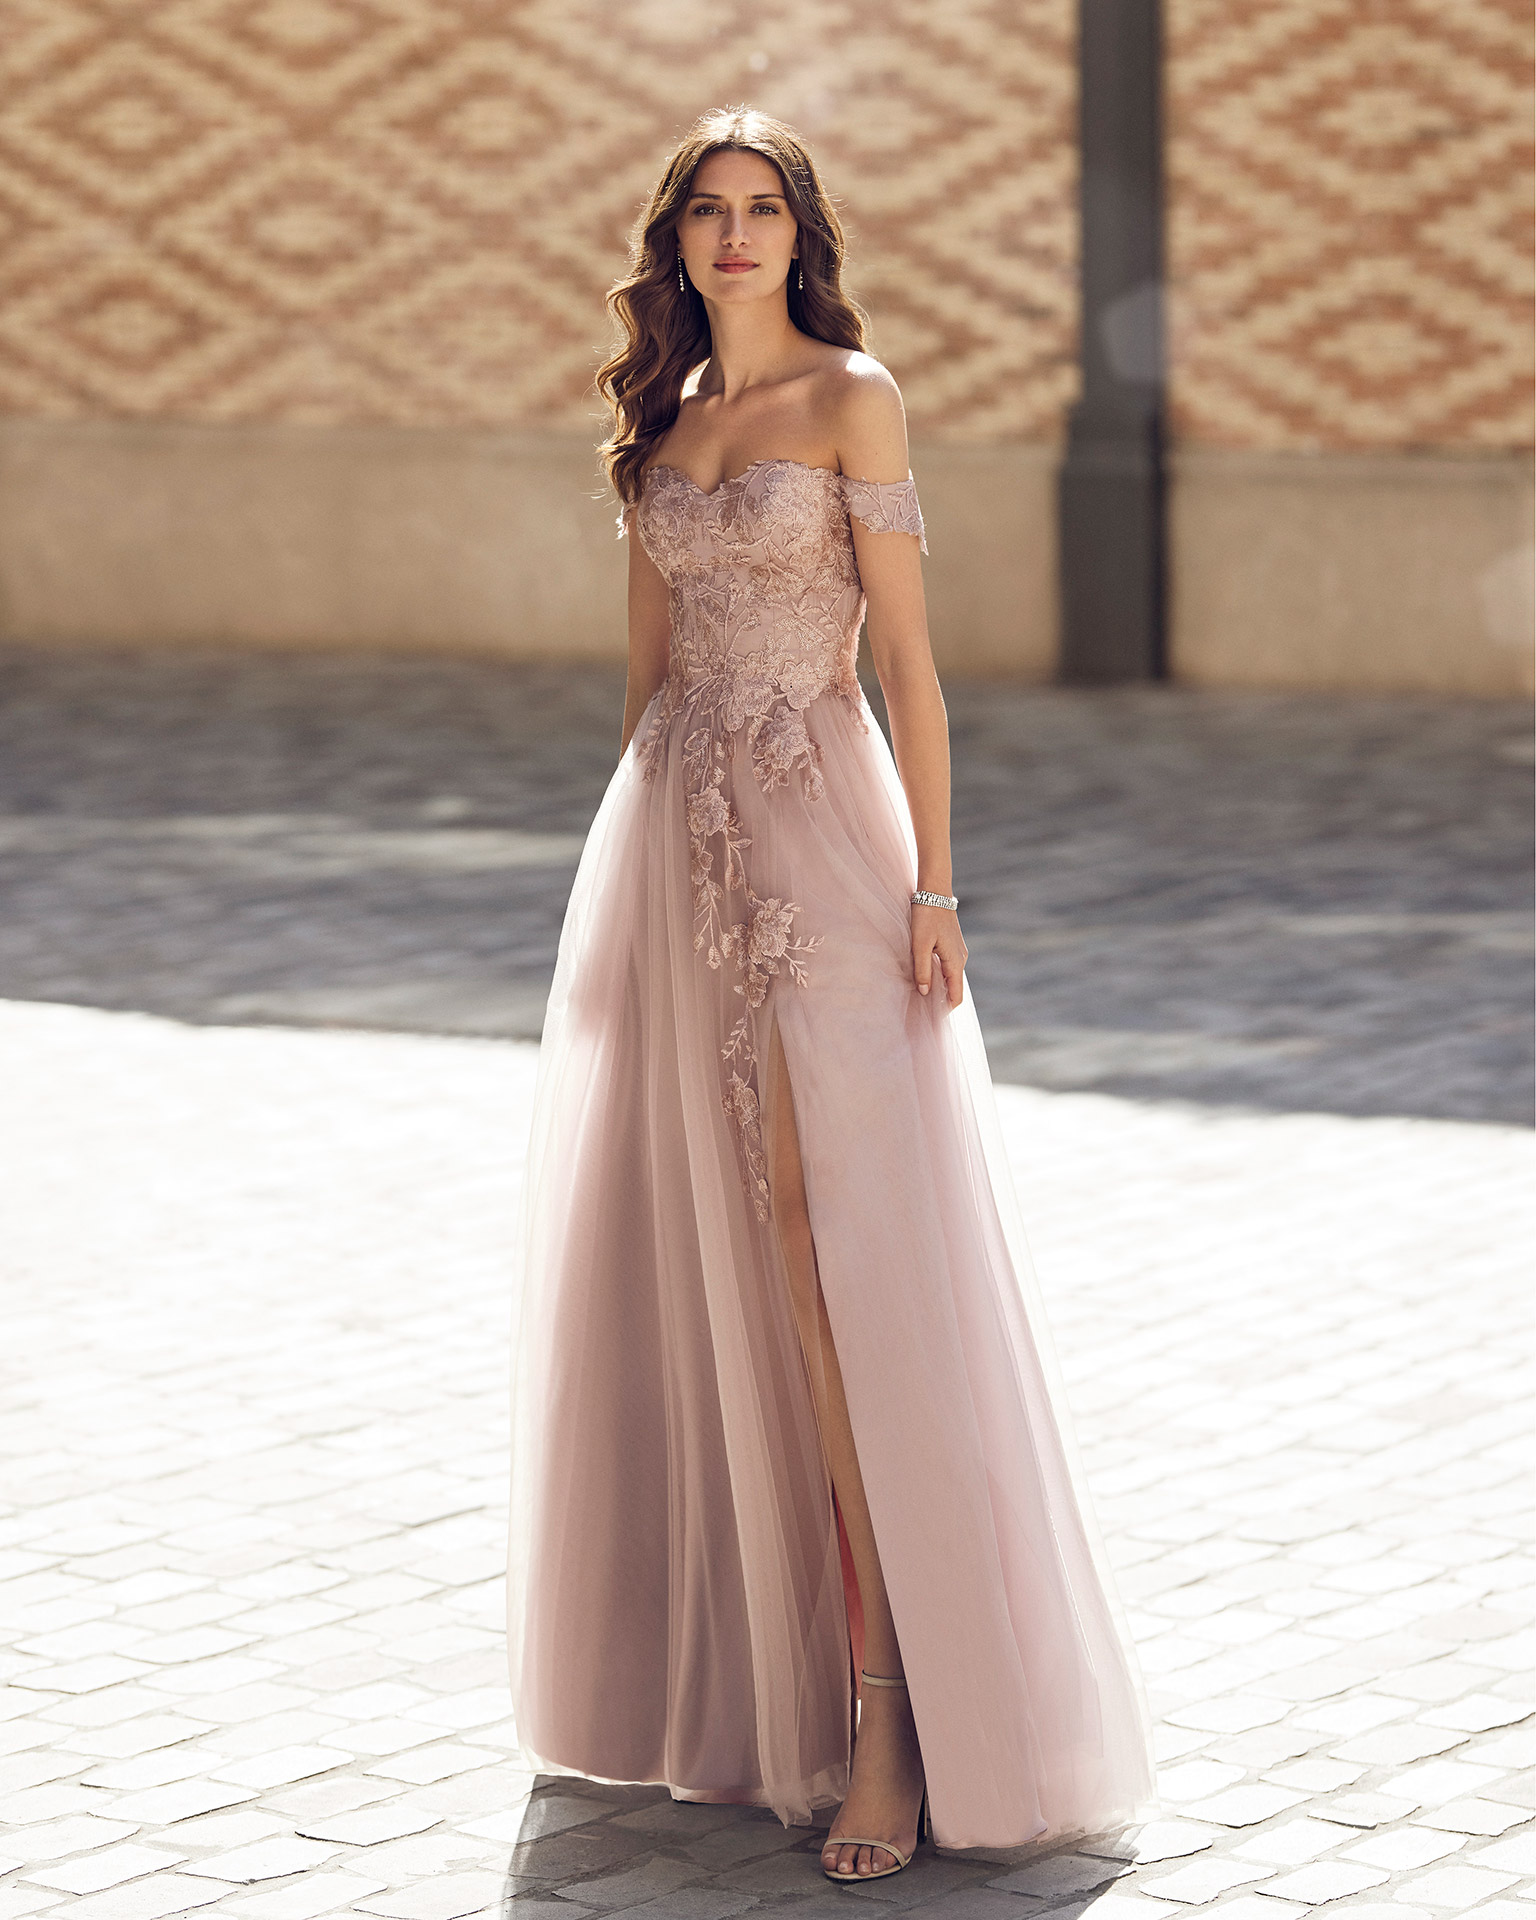 Long evening dress made of tulle and lace with beadwork. Marfil Barcelona design with a strapless neckline, and sleevelets. MARFIL_BARCELONA.